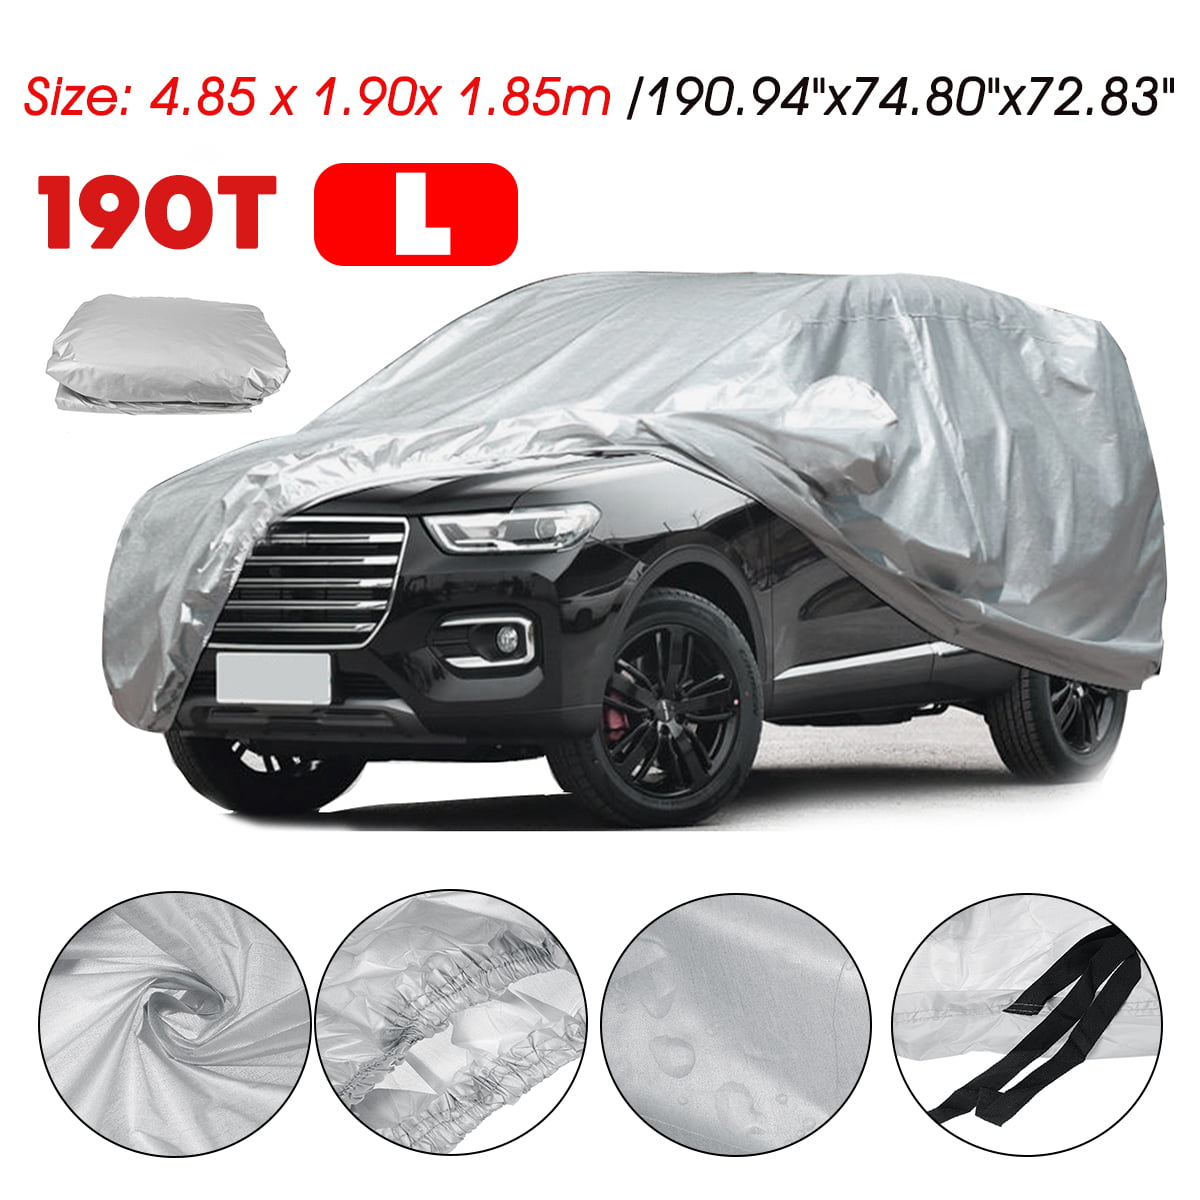 JUMM Clear PE Disposables Car Covers Waterproof Dustproof Scratch-Proof Windproof Universal Fit for Hatchback Sedan Off-Road SUVs 4 Sizes Universal Full Car Shield with Elastic Band 